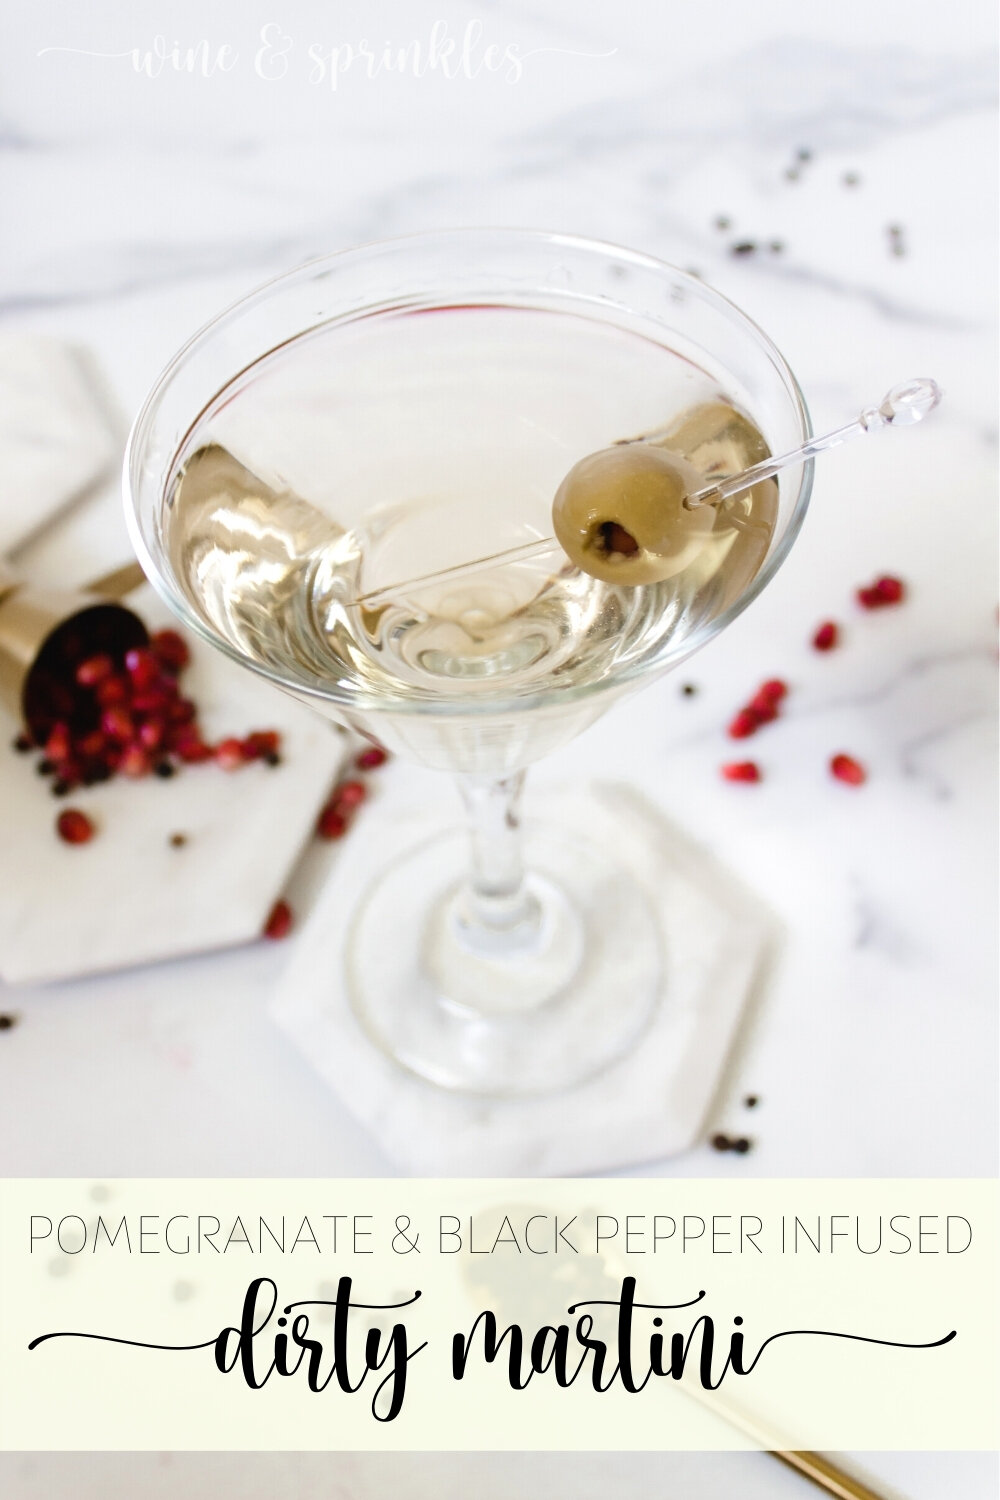 Pomegranate Pepper Infused Dirty Martini